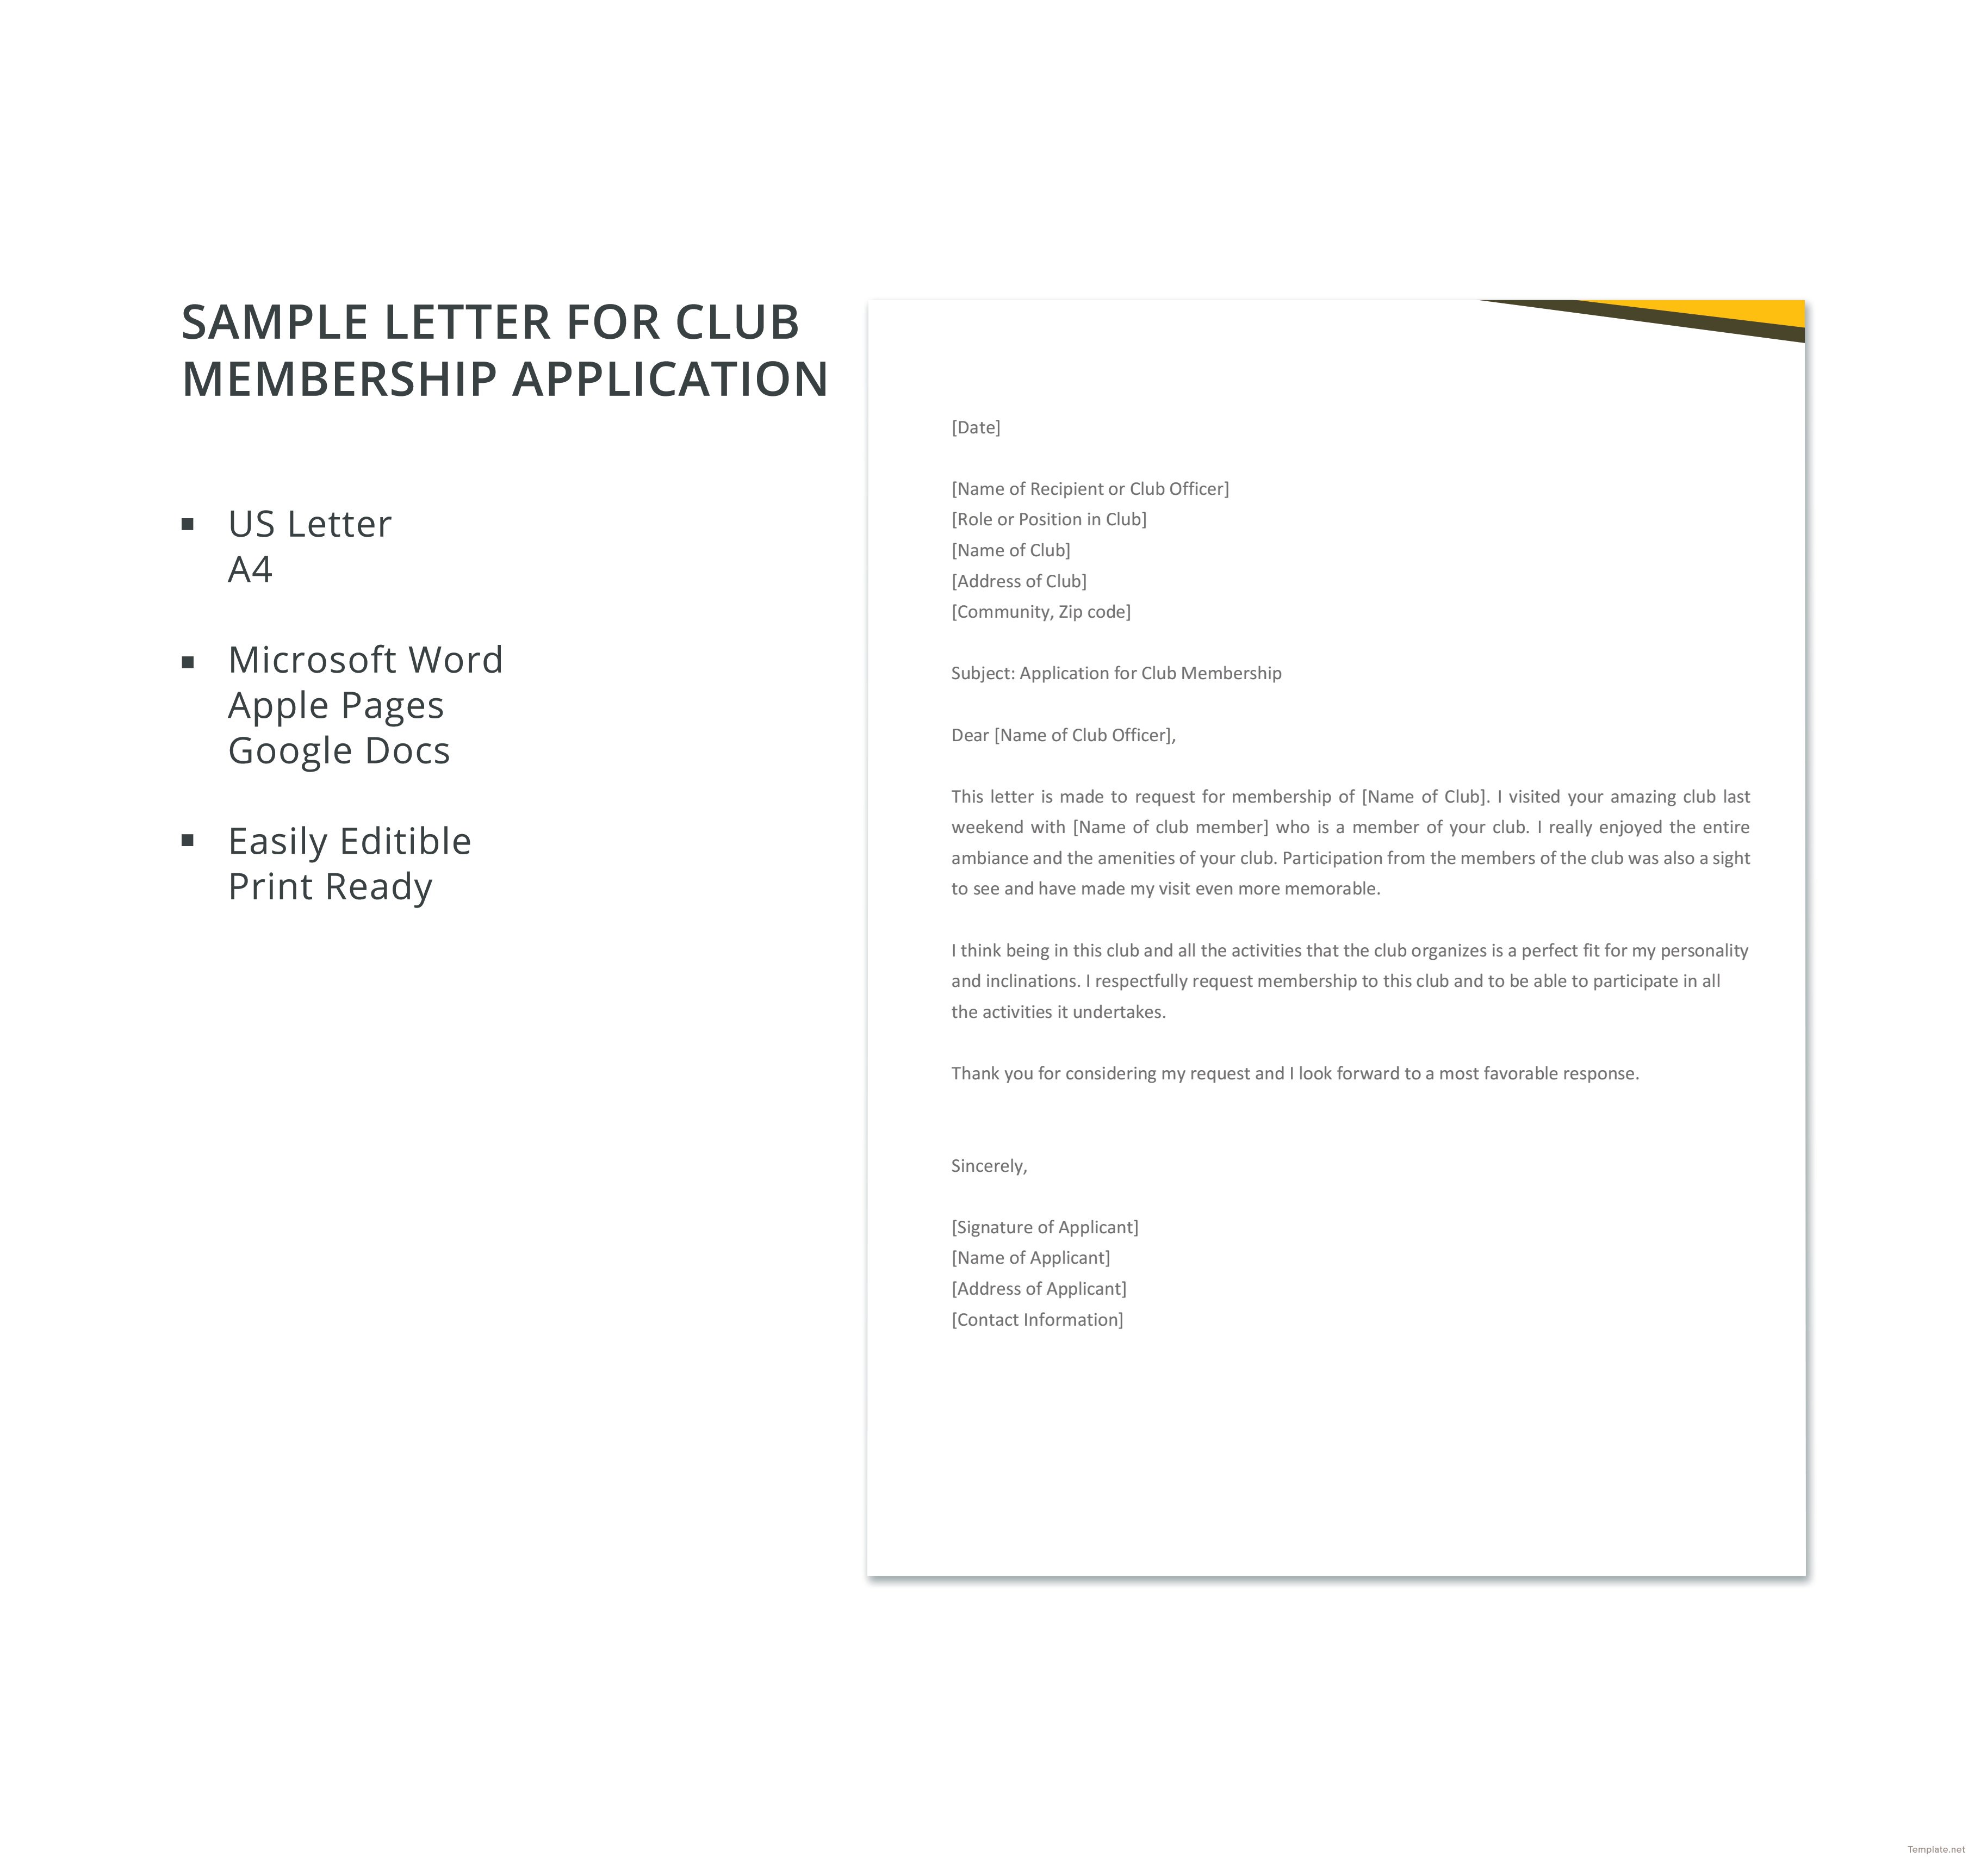 Sample Application Letter for Club Membership Template in Microsoft